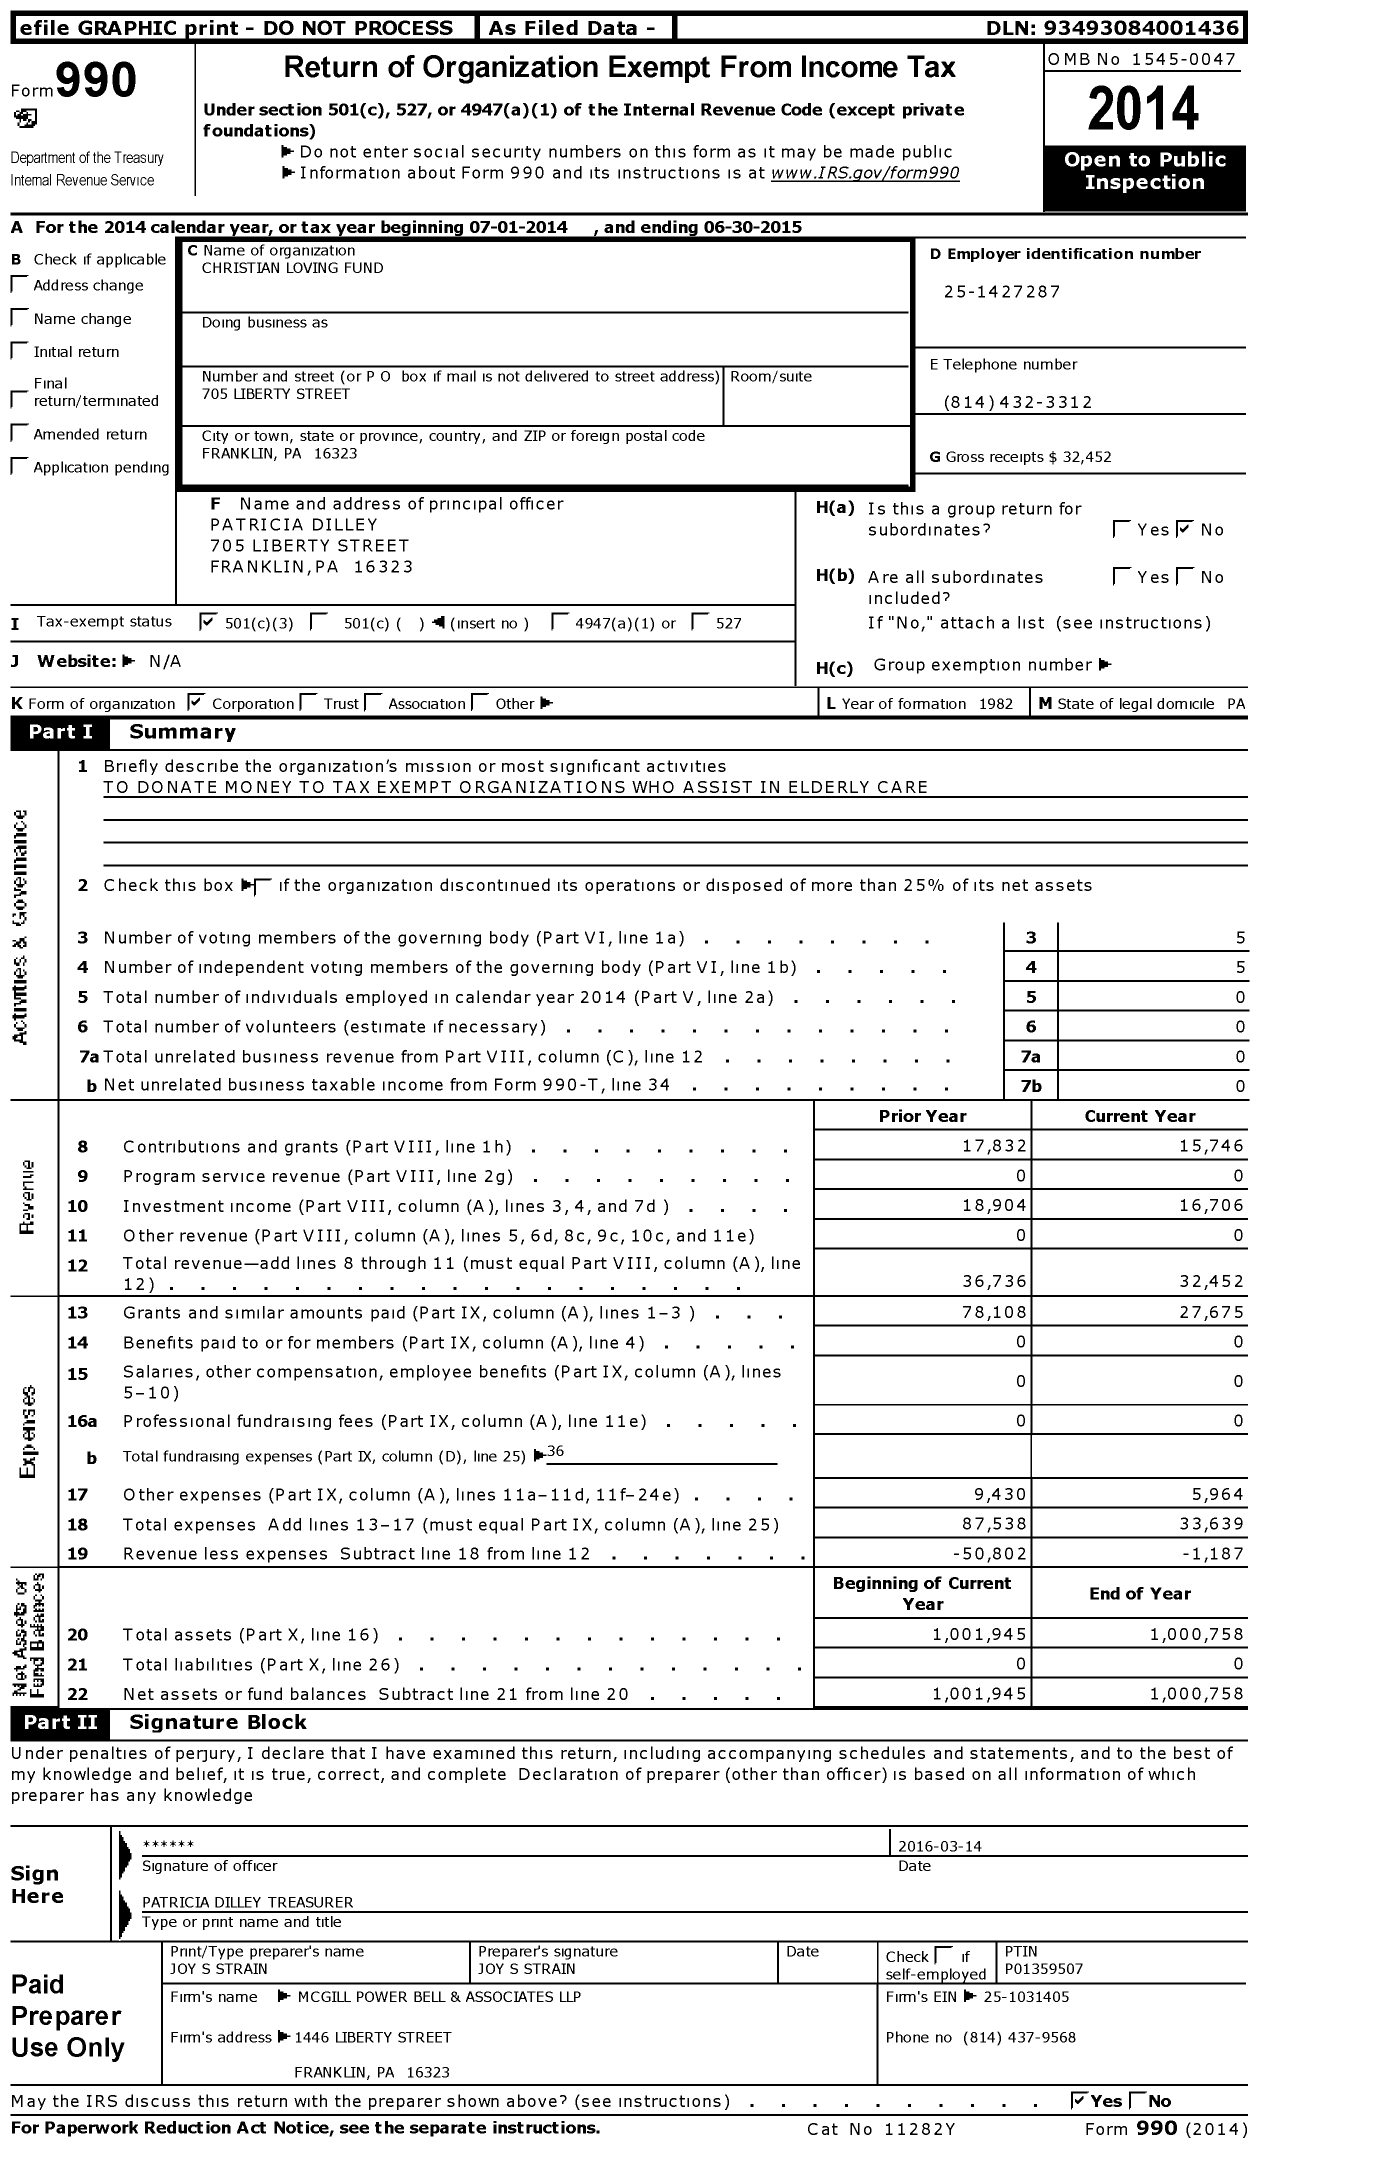 Image of first page of 2014 Form 990 for Christian Loving Fund